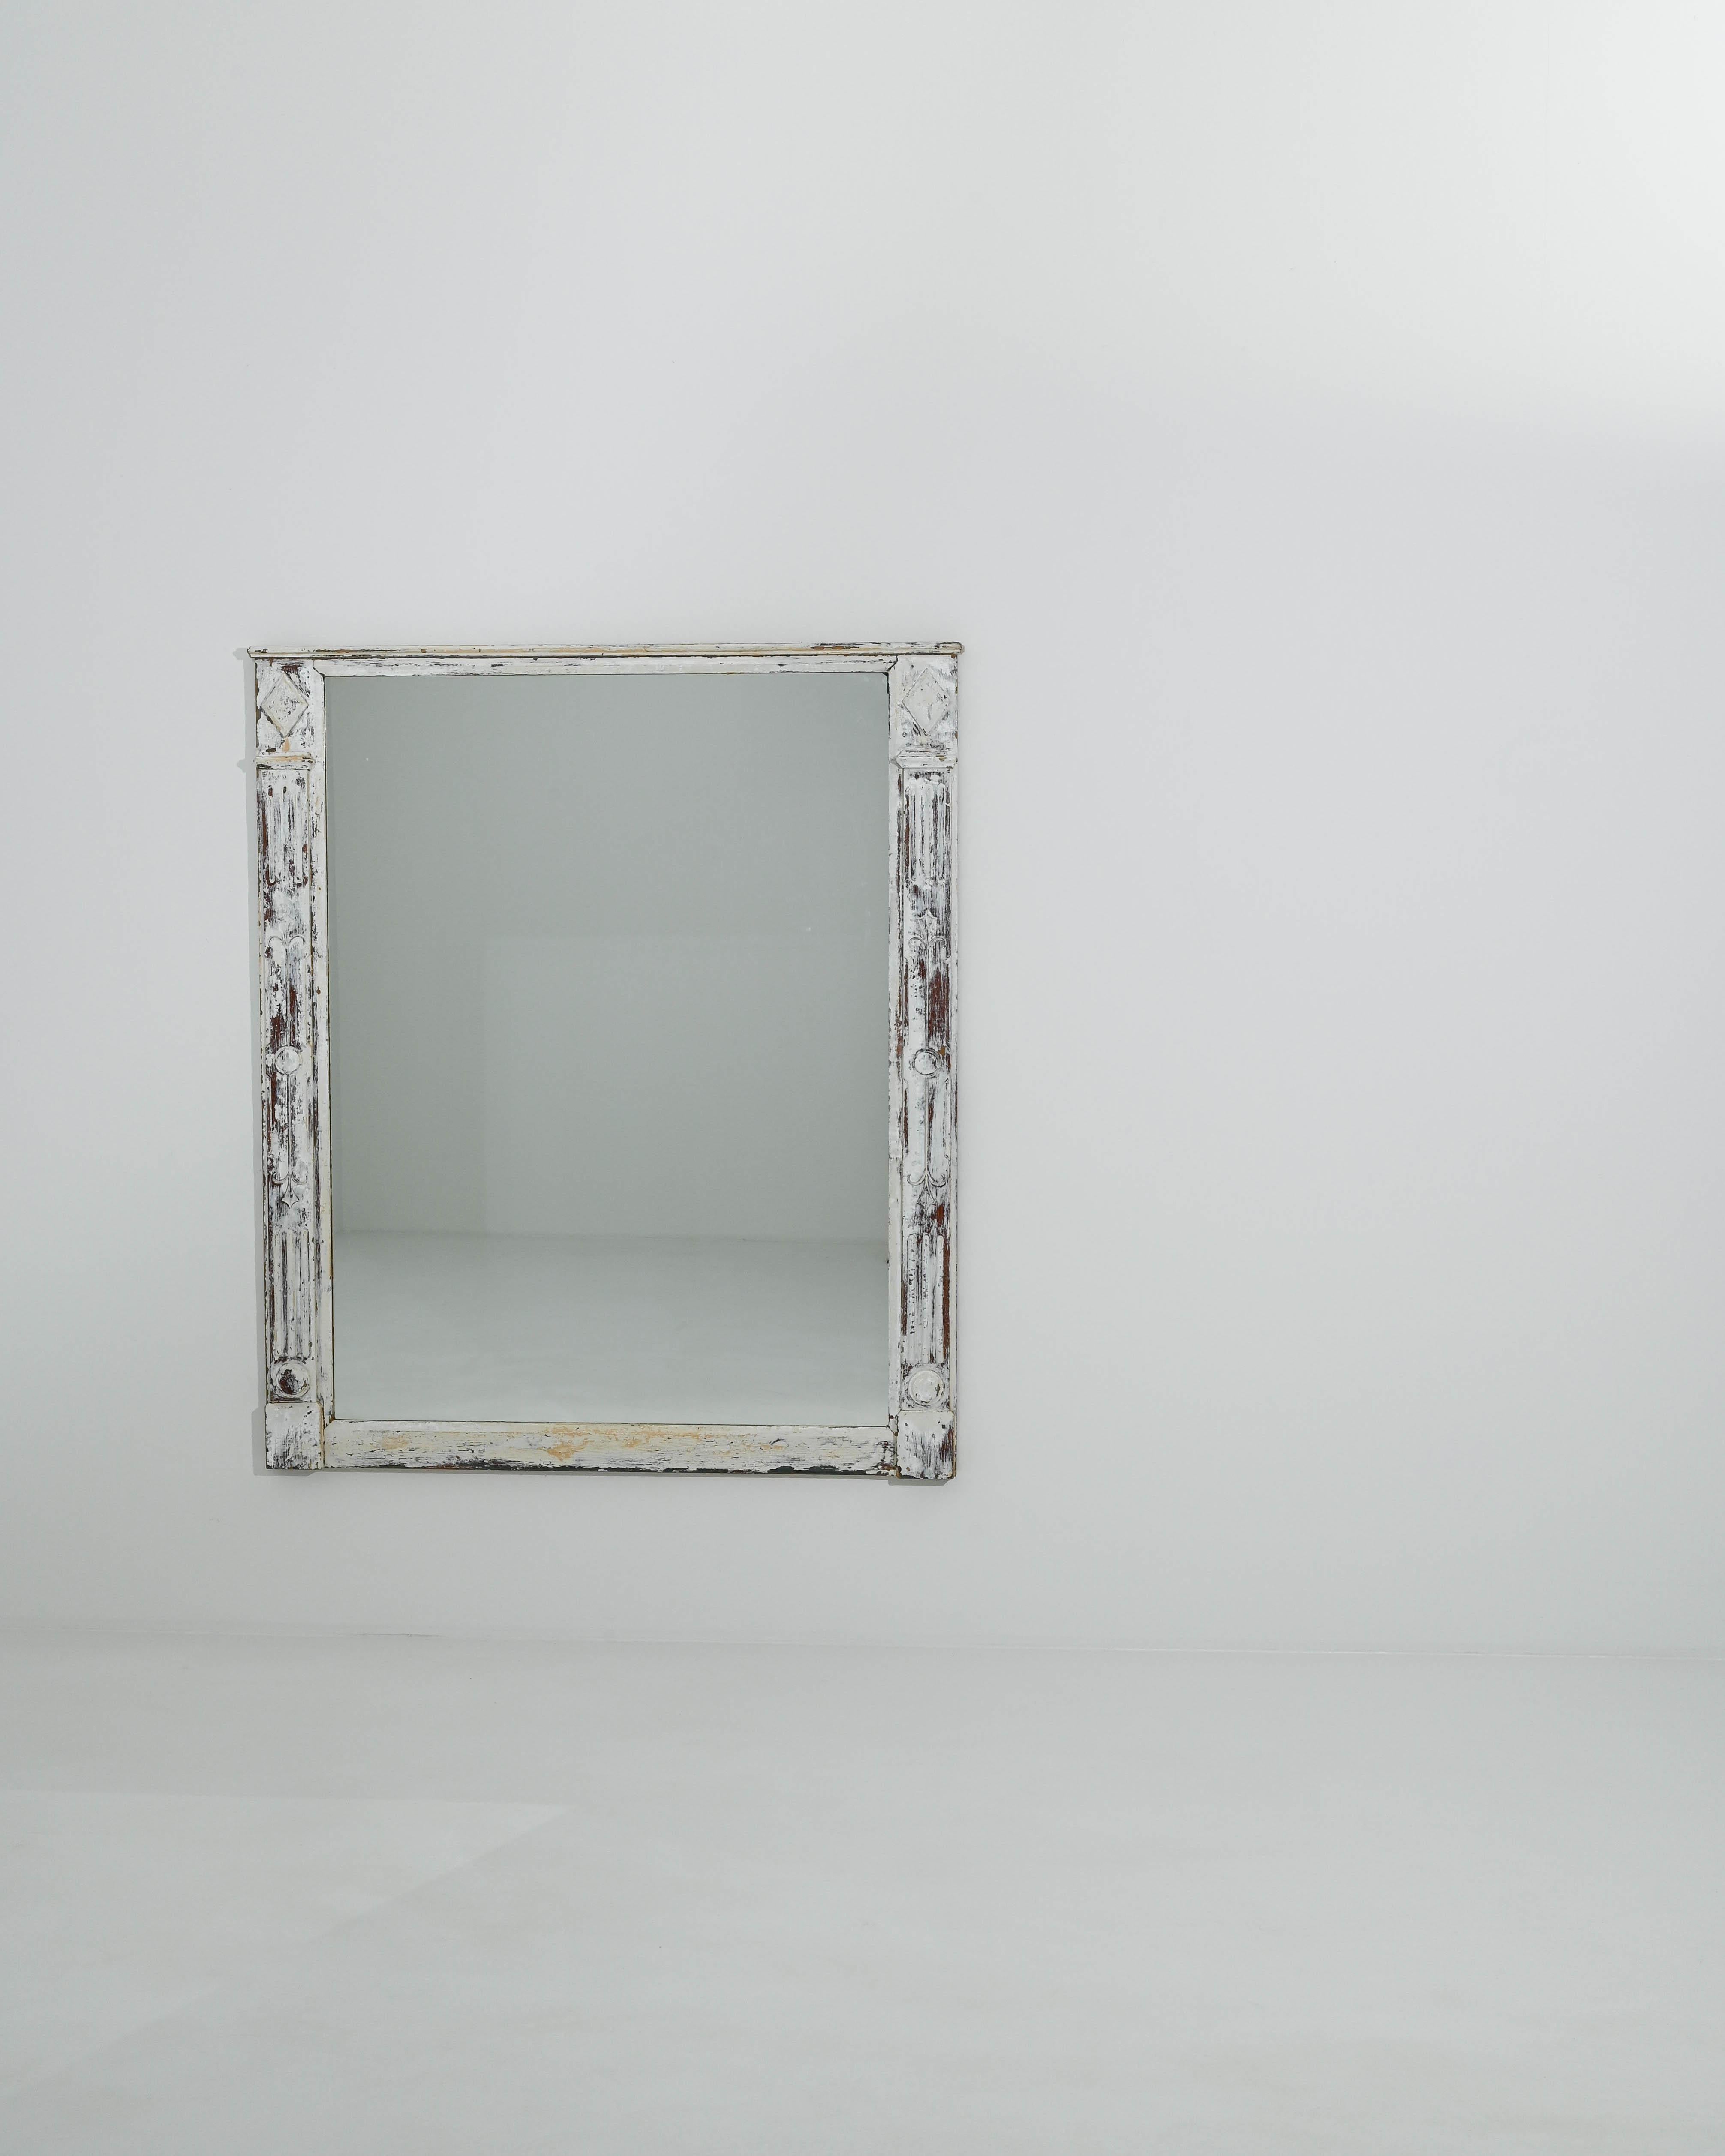 The elegant design and unique patina of this antique wooden mirror give it a timeless appeal. Made in France in the 1800s, the form has a restrained architectural quality. The wide pane of glass is framed by a pair of columns, decorated with fluted